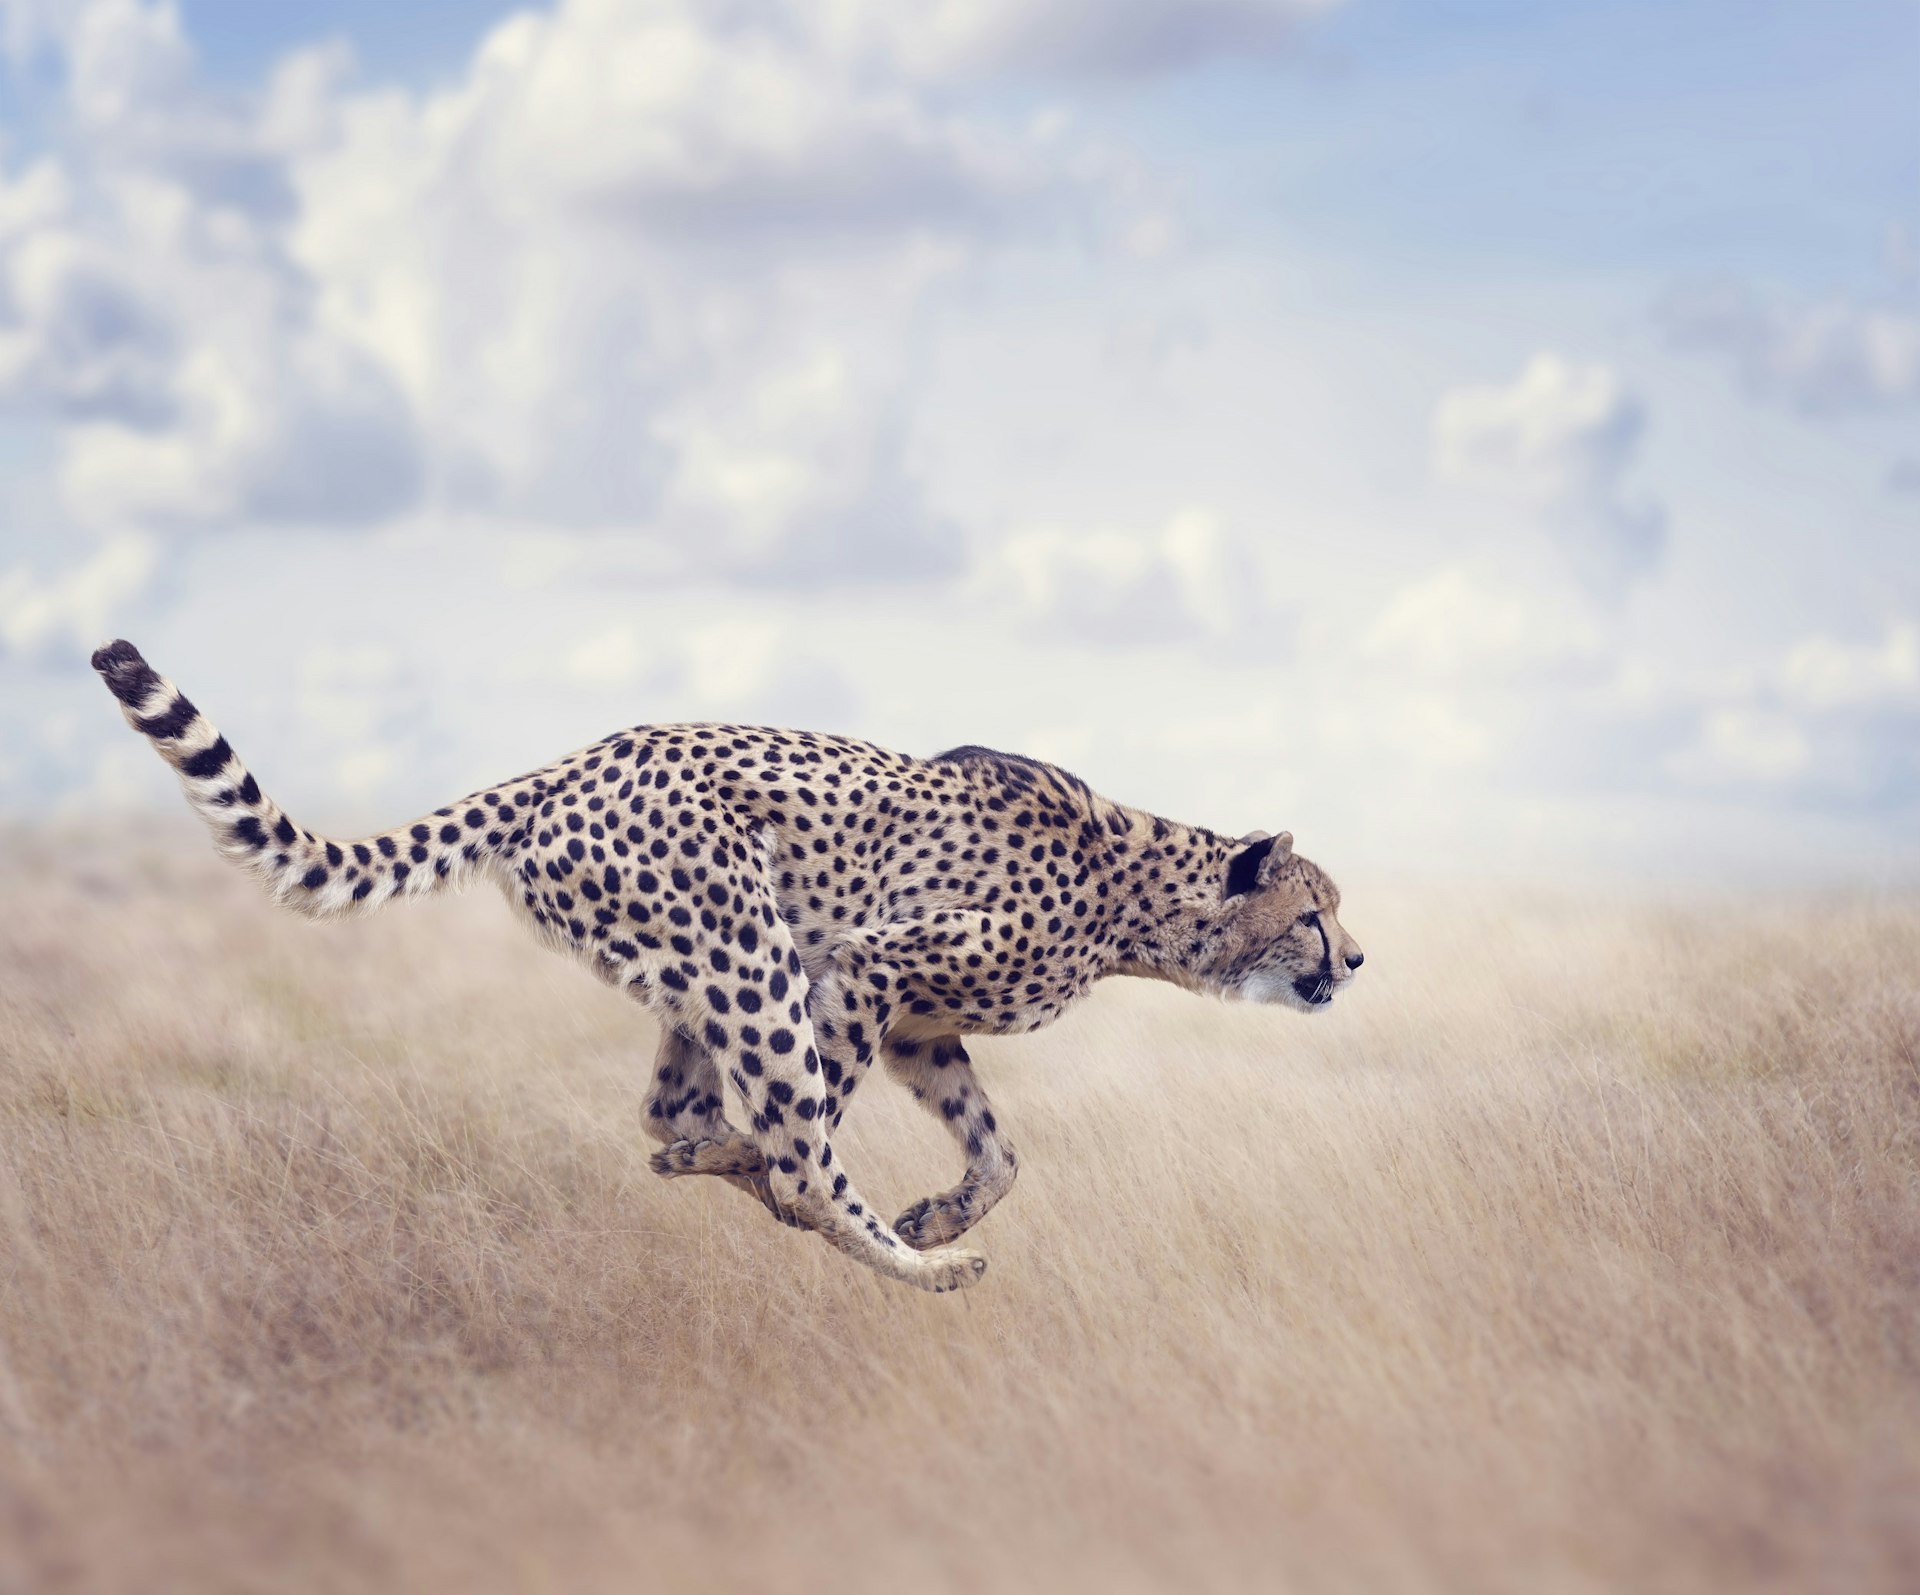 A side image of a cheetah in mid-stride; it's airborne with its front legs crossing between its back legs. It's running through long golden grass.